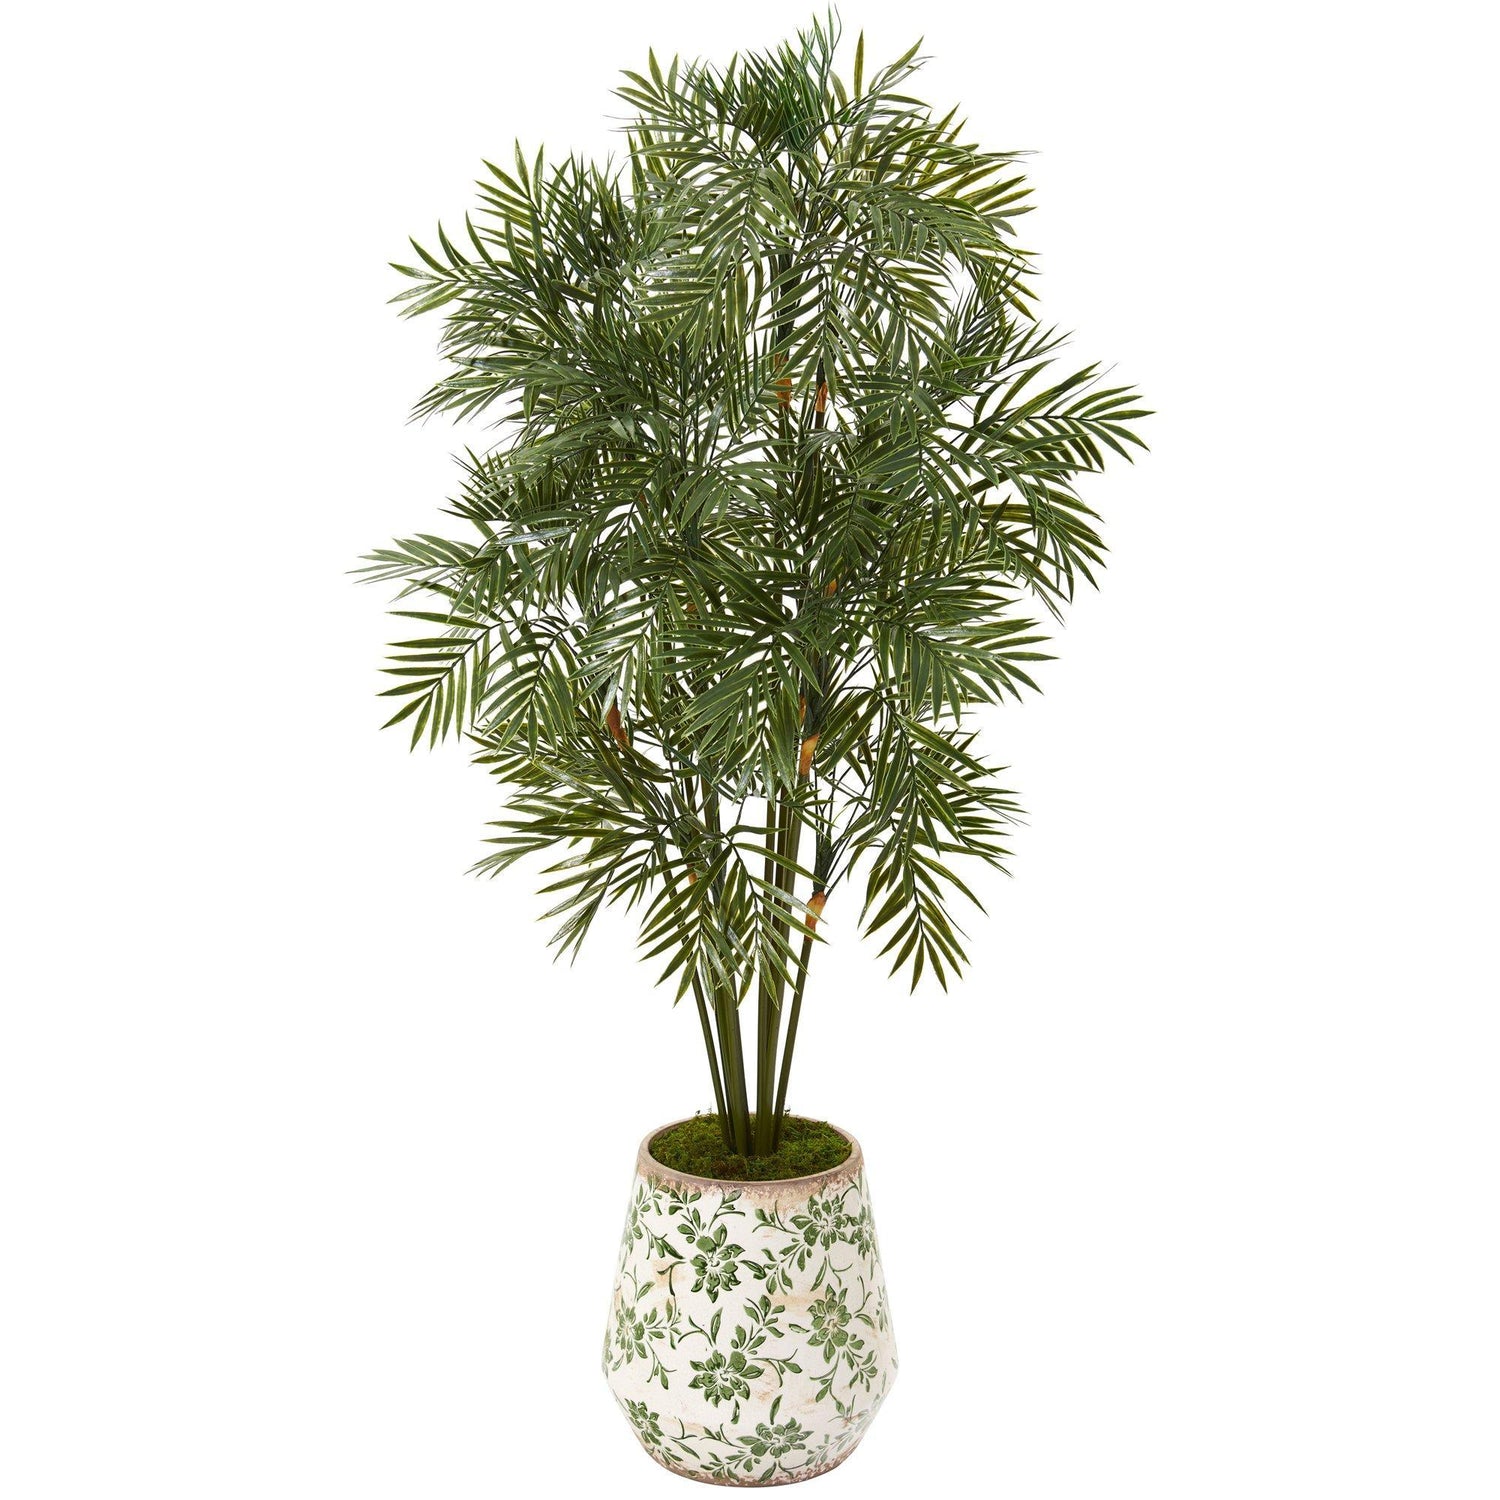 52” Parlor Palm Artificial Tree in Floral Print Planter